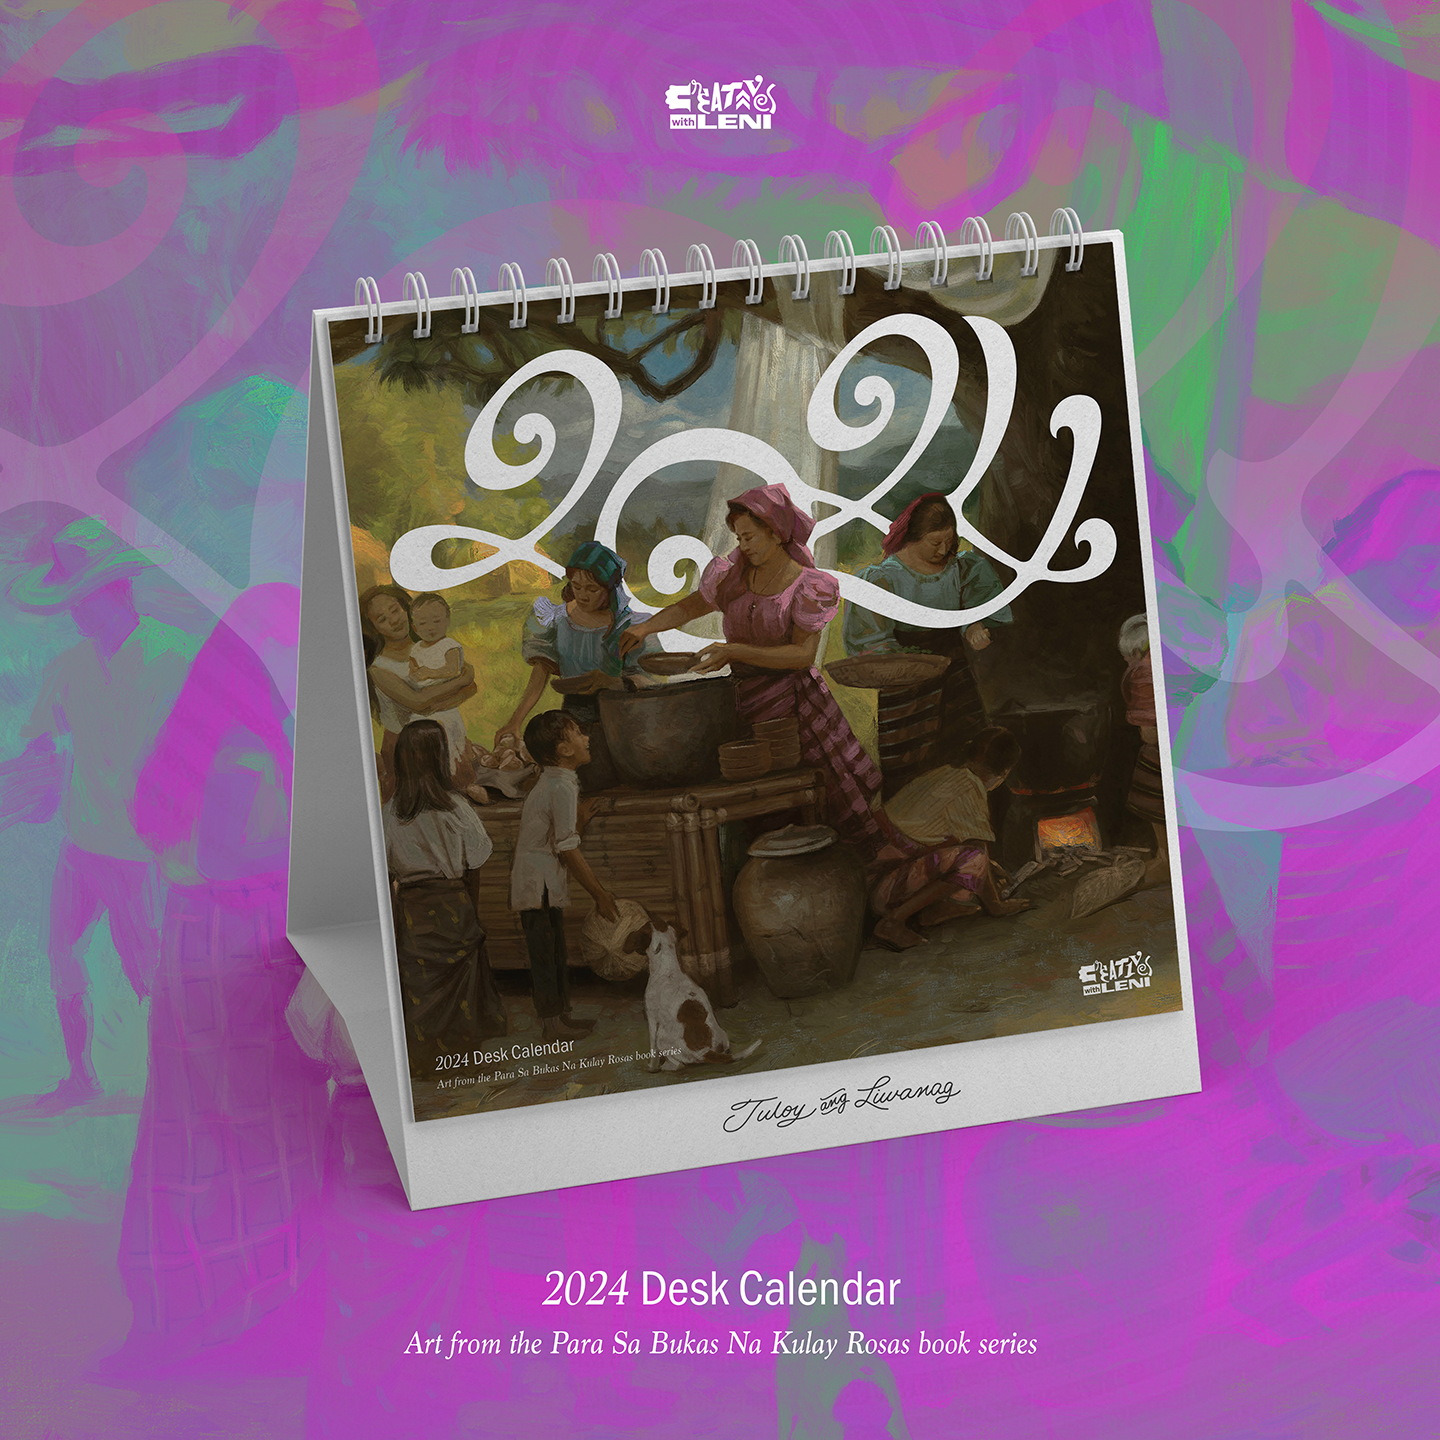 ARTISTRY GALORE IN 2024: CWL unveils 2024 desk calendar featuring Pinoy artworks